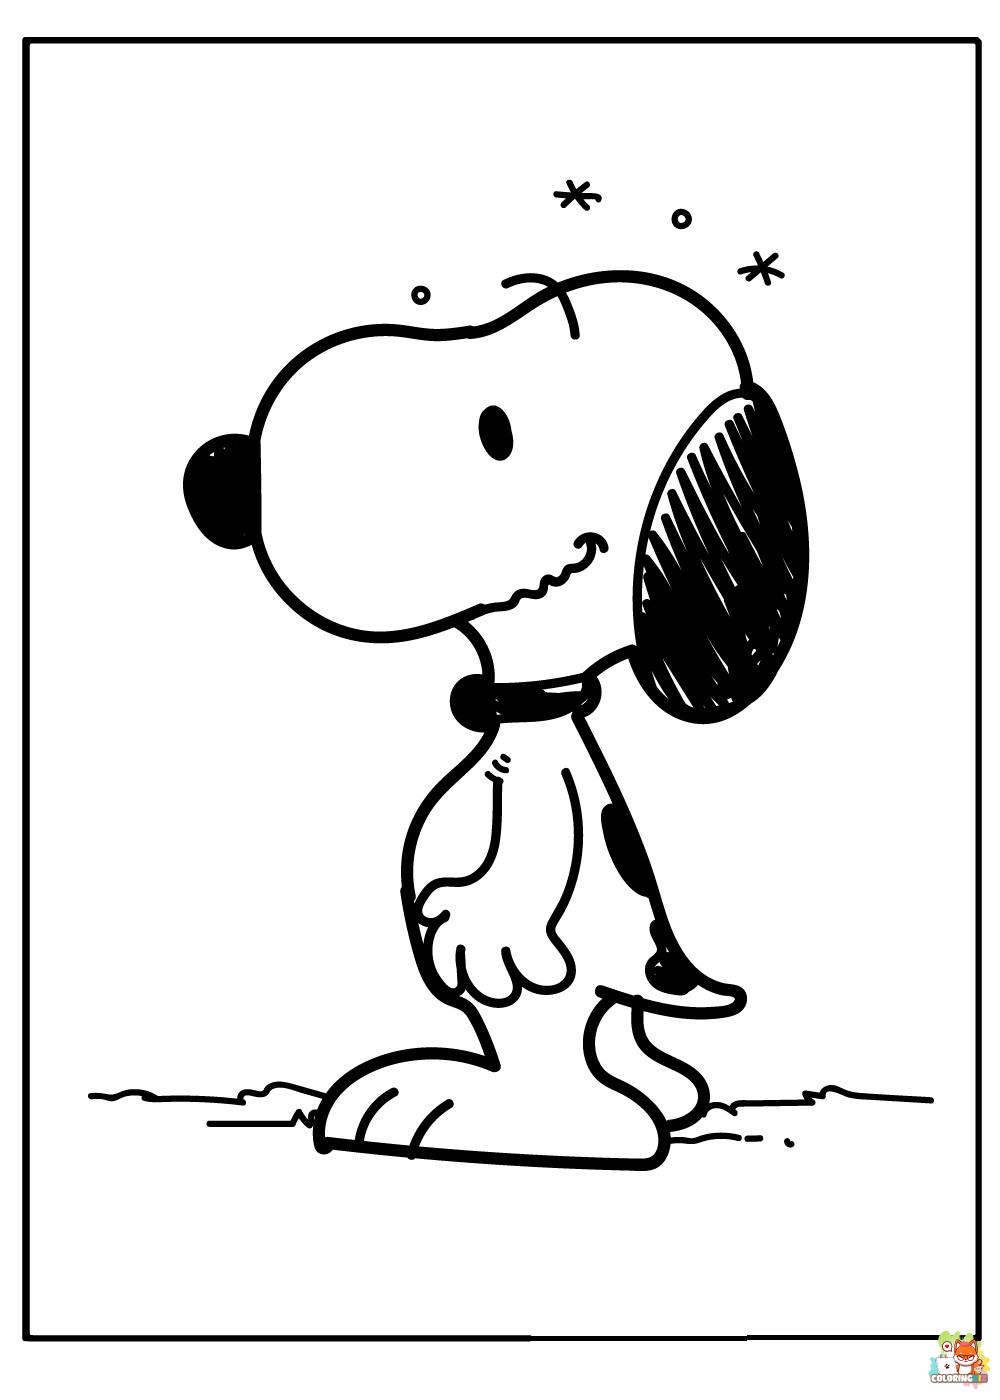 Snoopy Coolest Style Coloring Pages 6